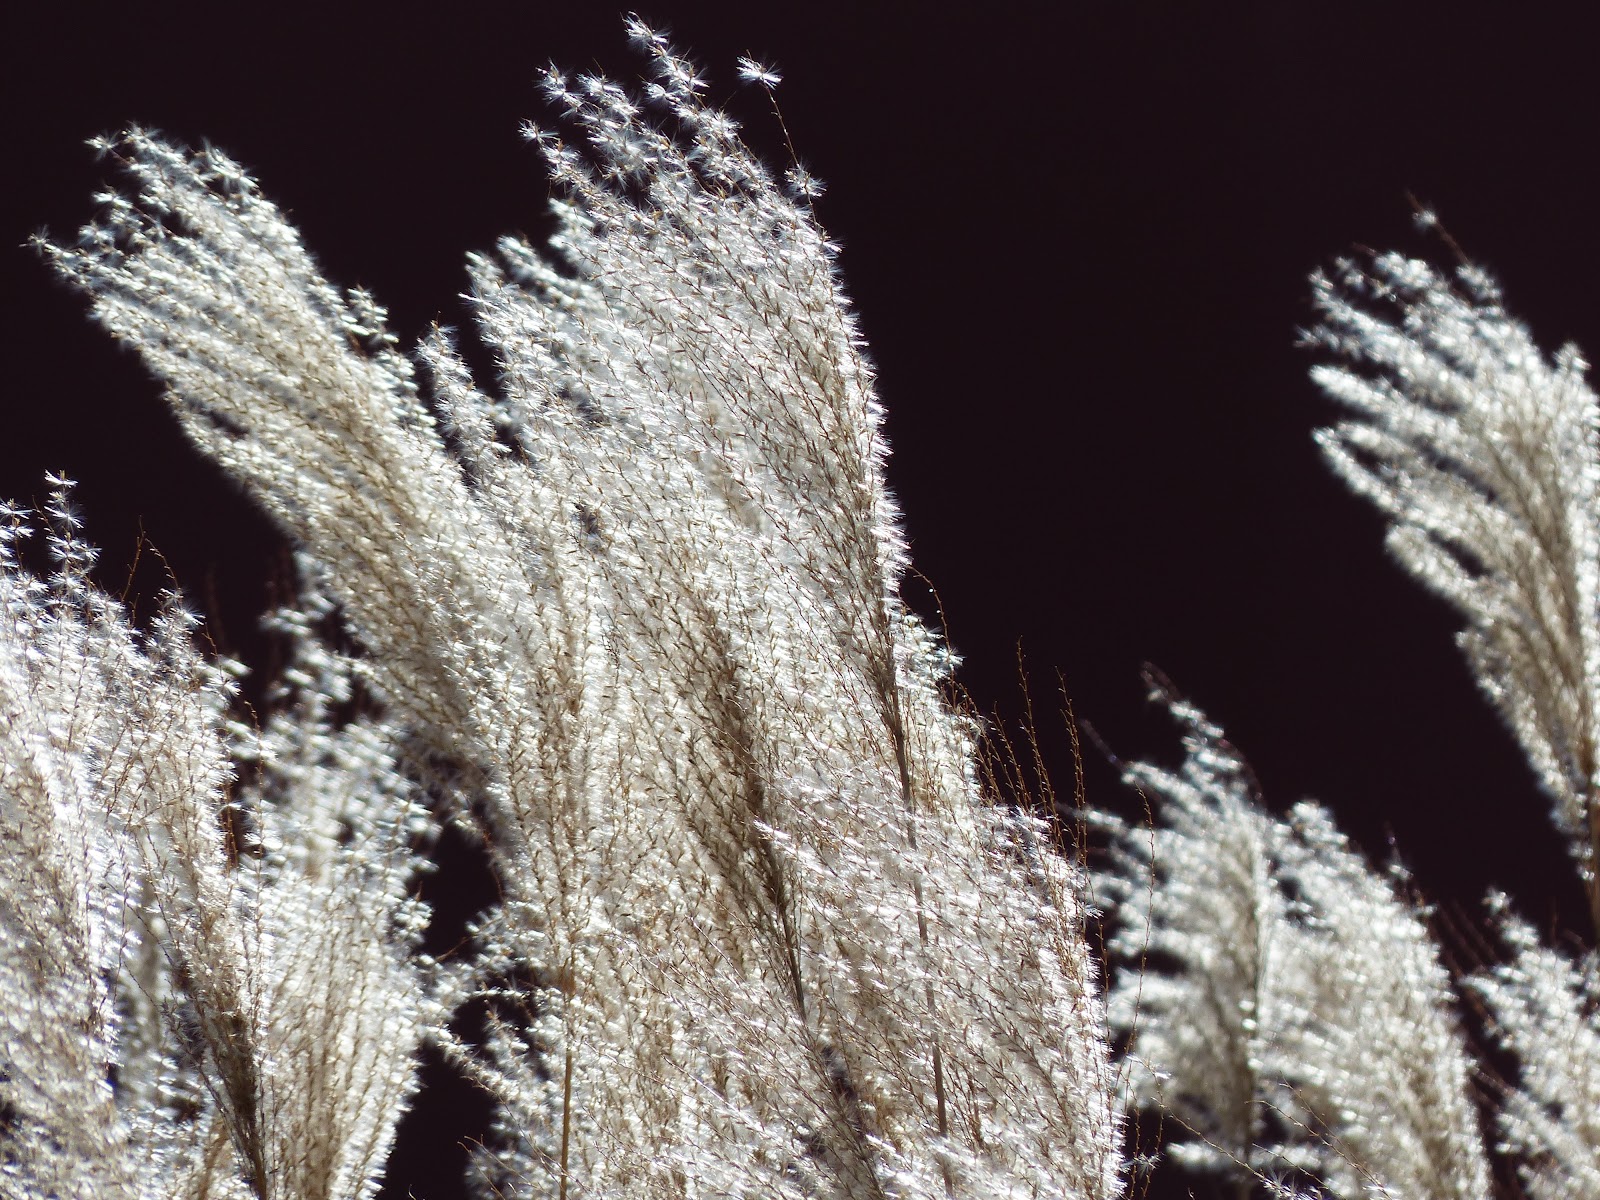 https://get.pxhere.com/photo/tree-nature-grass-branch-snow-winter-plant-leaf-flower-frost-reed-ice-golden-flora-season-close-up-spruce-silver-mood-shimmer-freezing-poaceae-licorice-back-light-macro-photography-ornamental-plant-bamboo-grassedit-this-page-miscanthus-silver-spring-grass-family-woody-plant-land-plant-miscanthus-sinensis-small-elefantengras-1132428.jpg